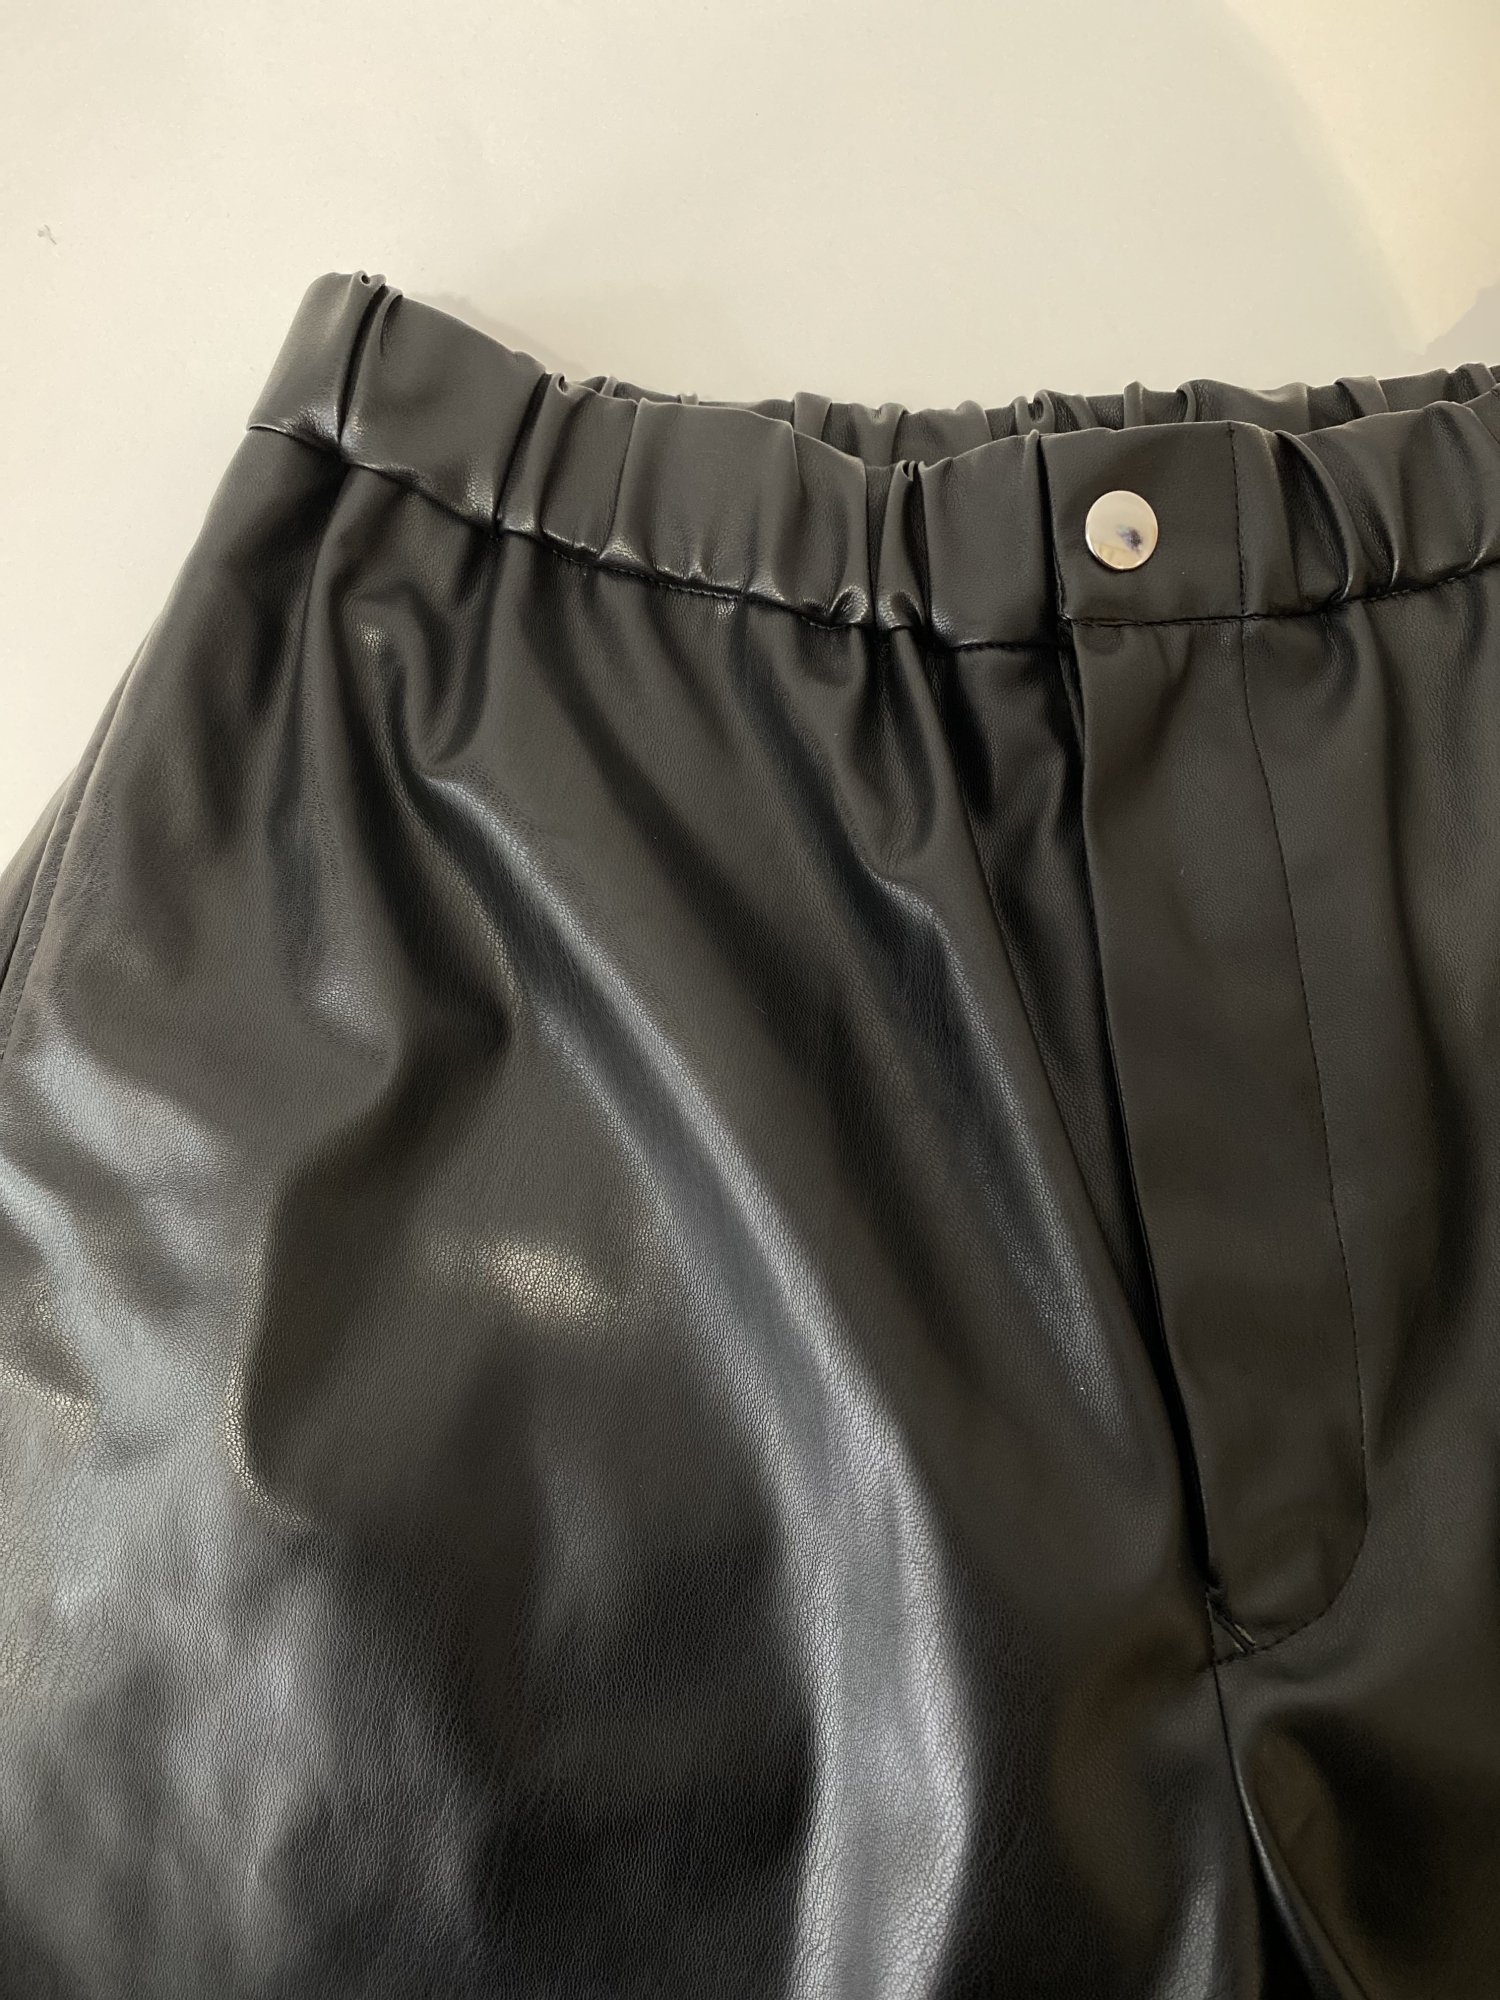 ALLEGE<br />Synthetic Leather Shorts / BLACK<img class='new_mark_img2' src='https://img.shop-pro.jp/img/new/icons14.gif' style='border:none;display:inline;margin:0px;padding:0px;width:auto;' />